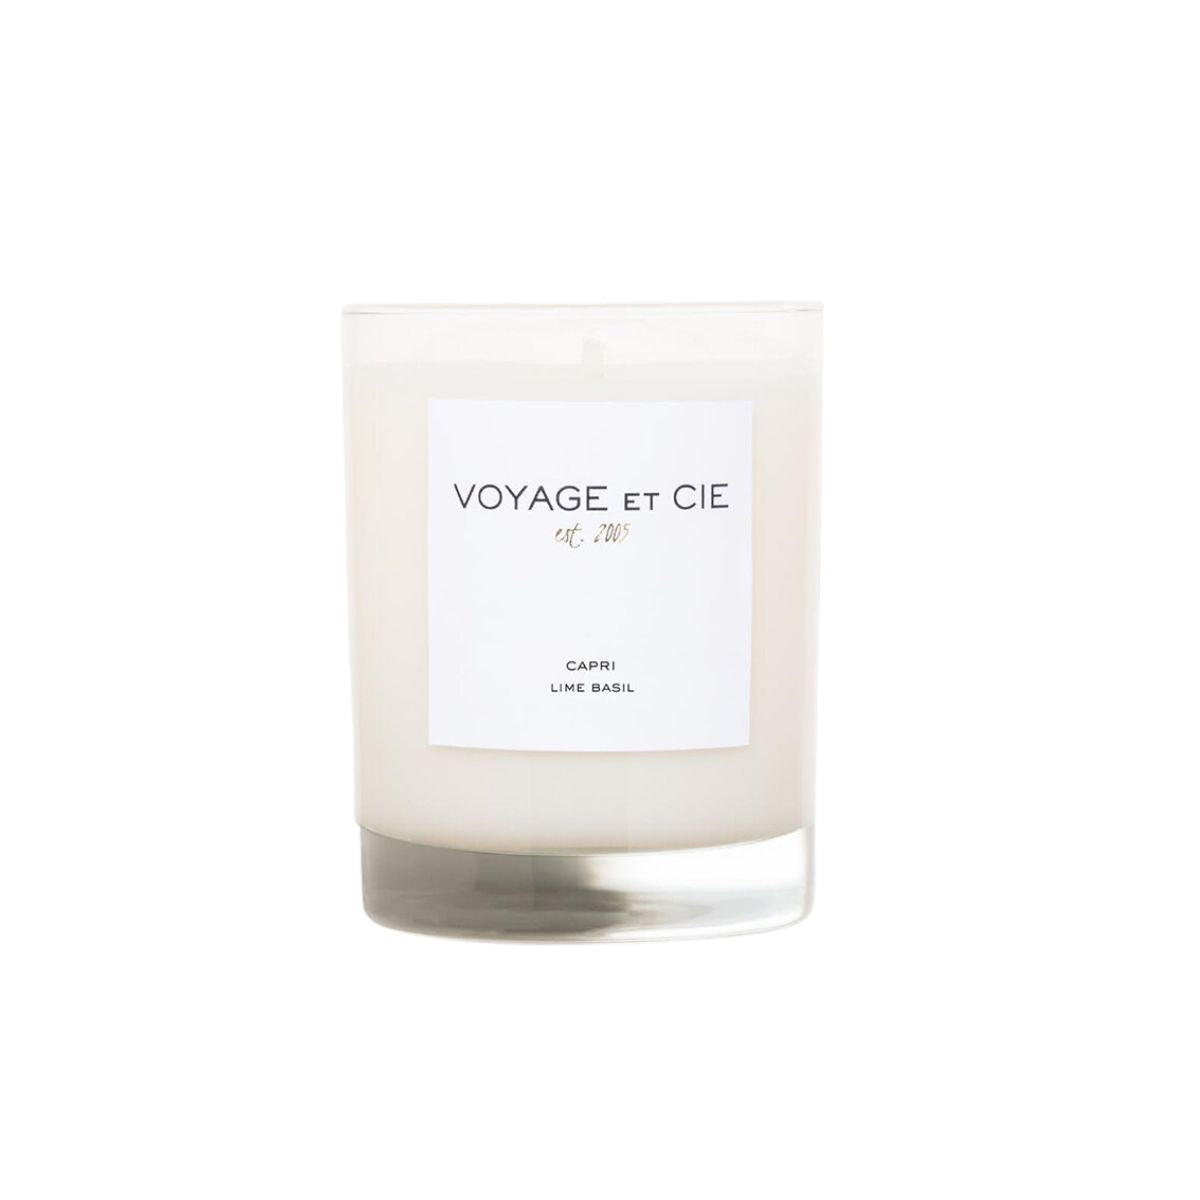 Voyage Et Cie Classic Highball Candle in Black Box in Paris Boudoir